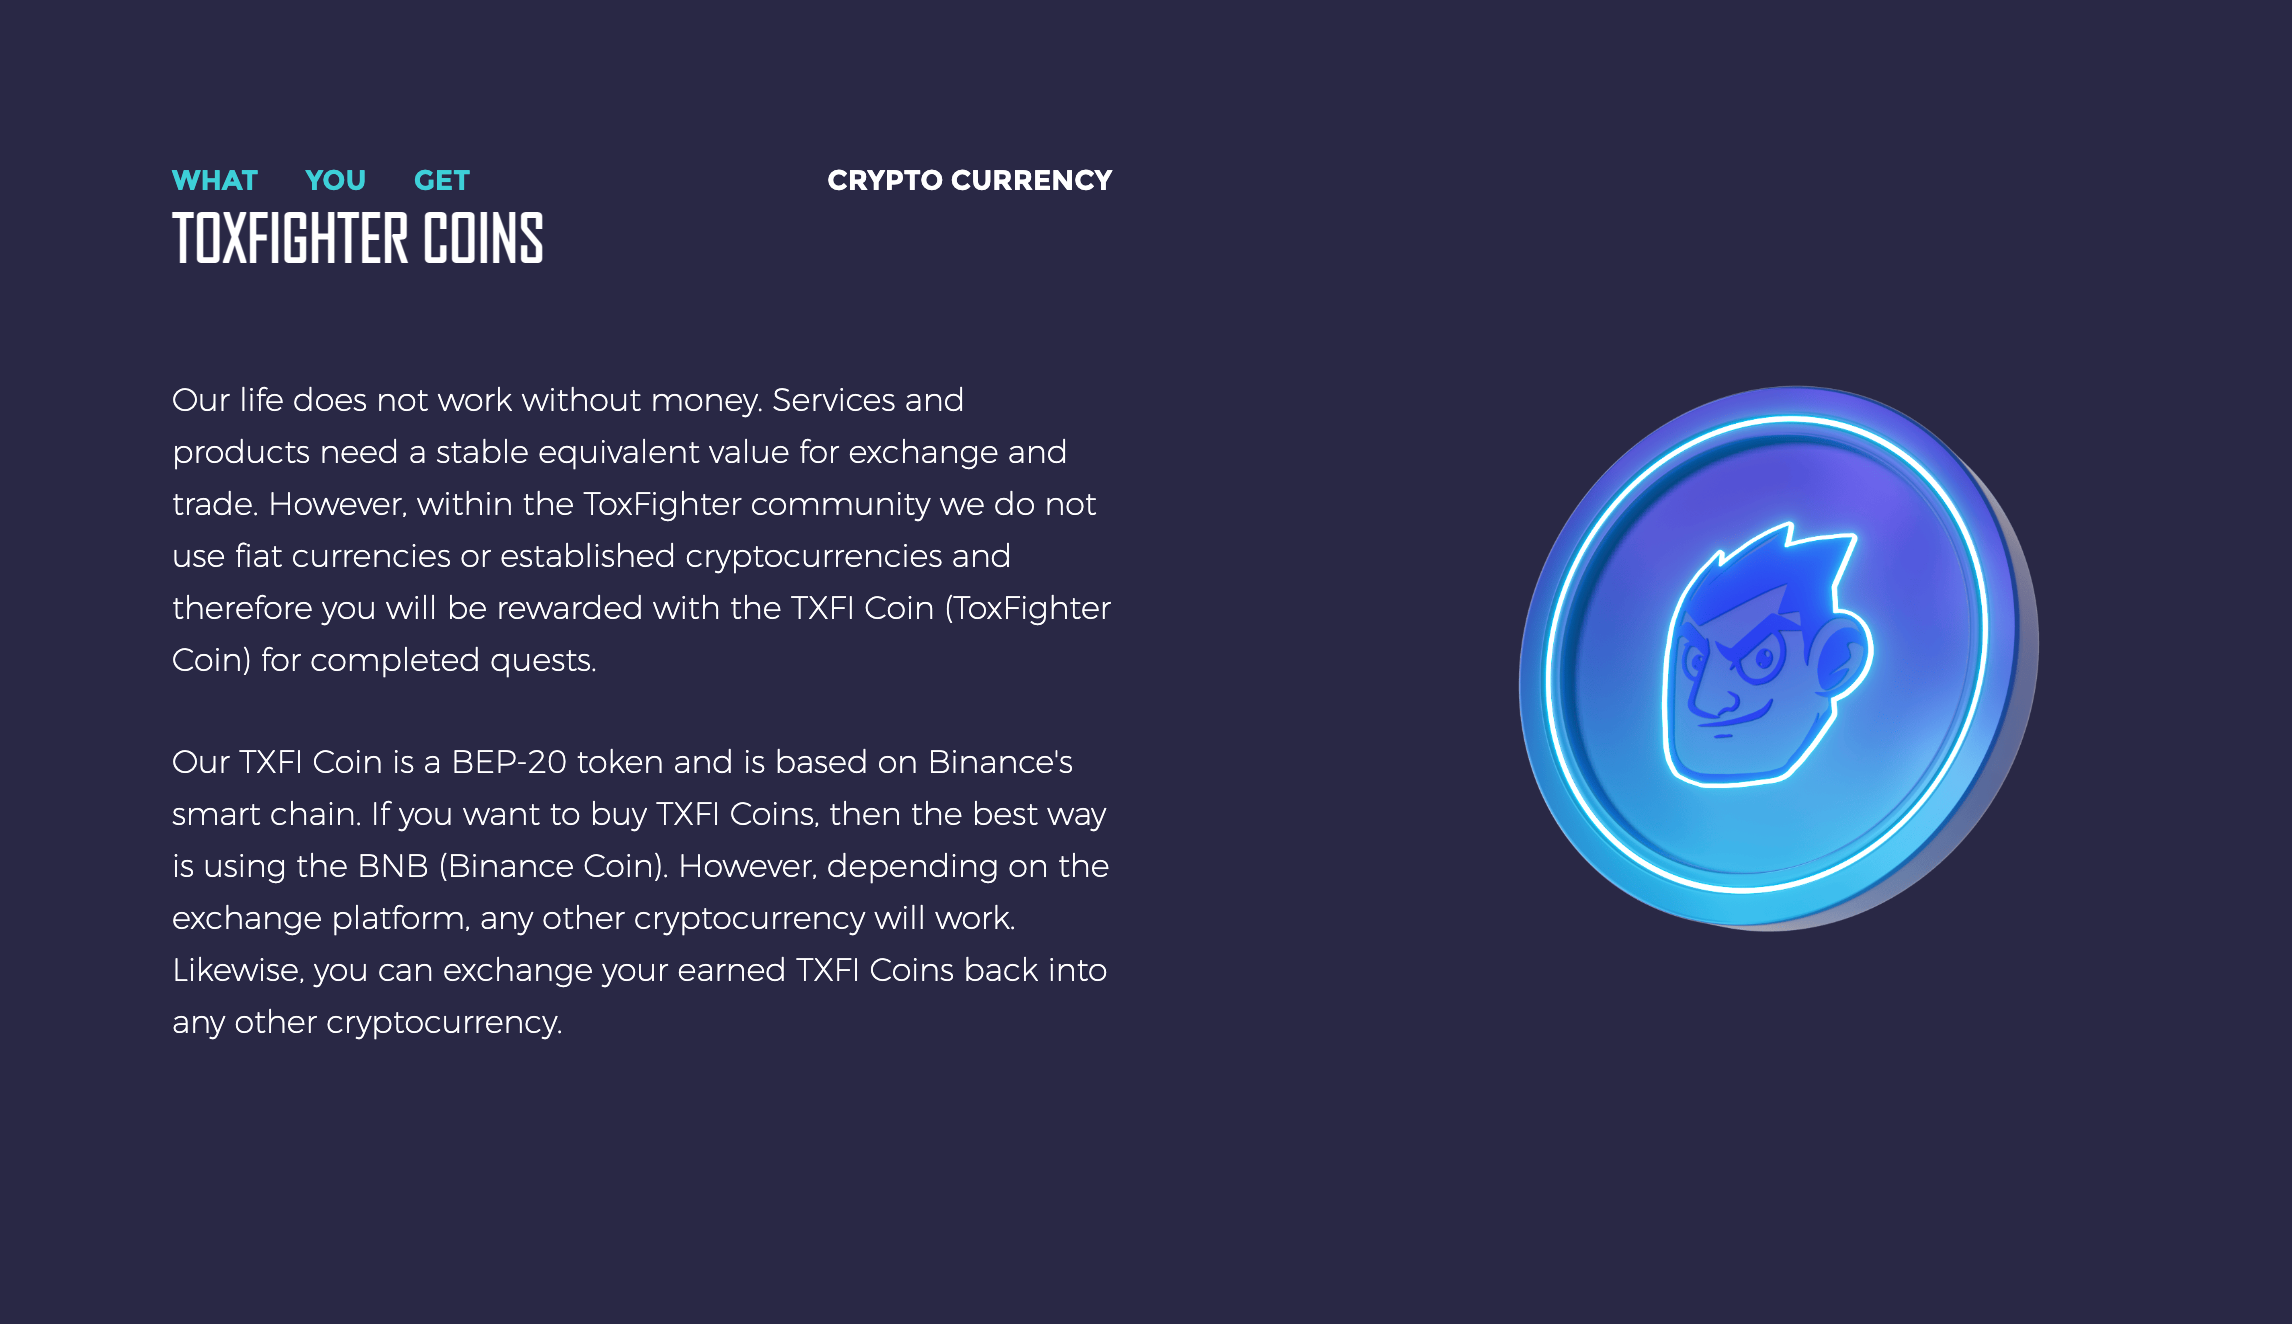 Get Crypto Rewards For Testing Detox Products with ToxFighter